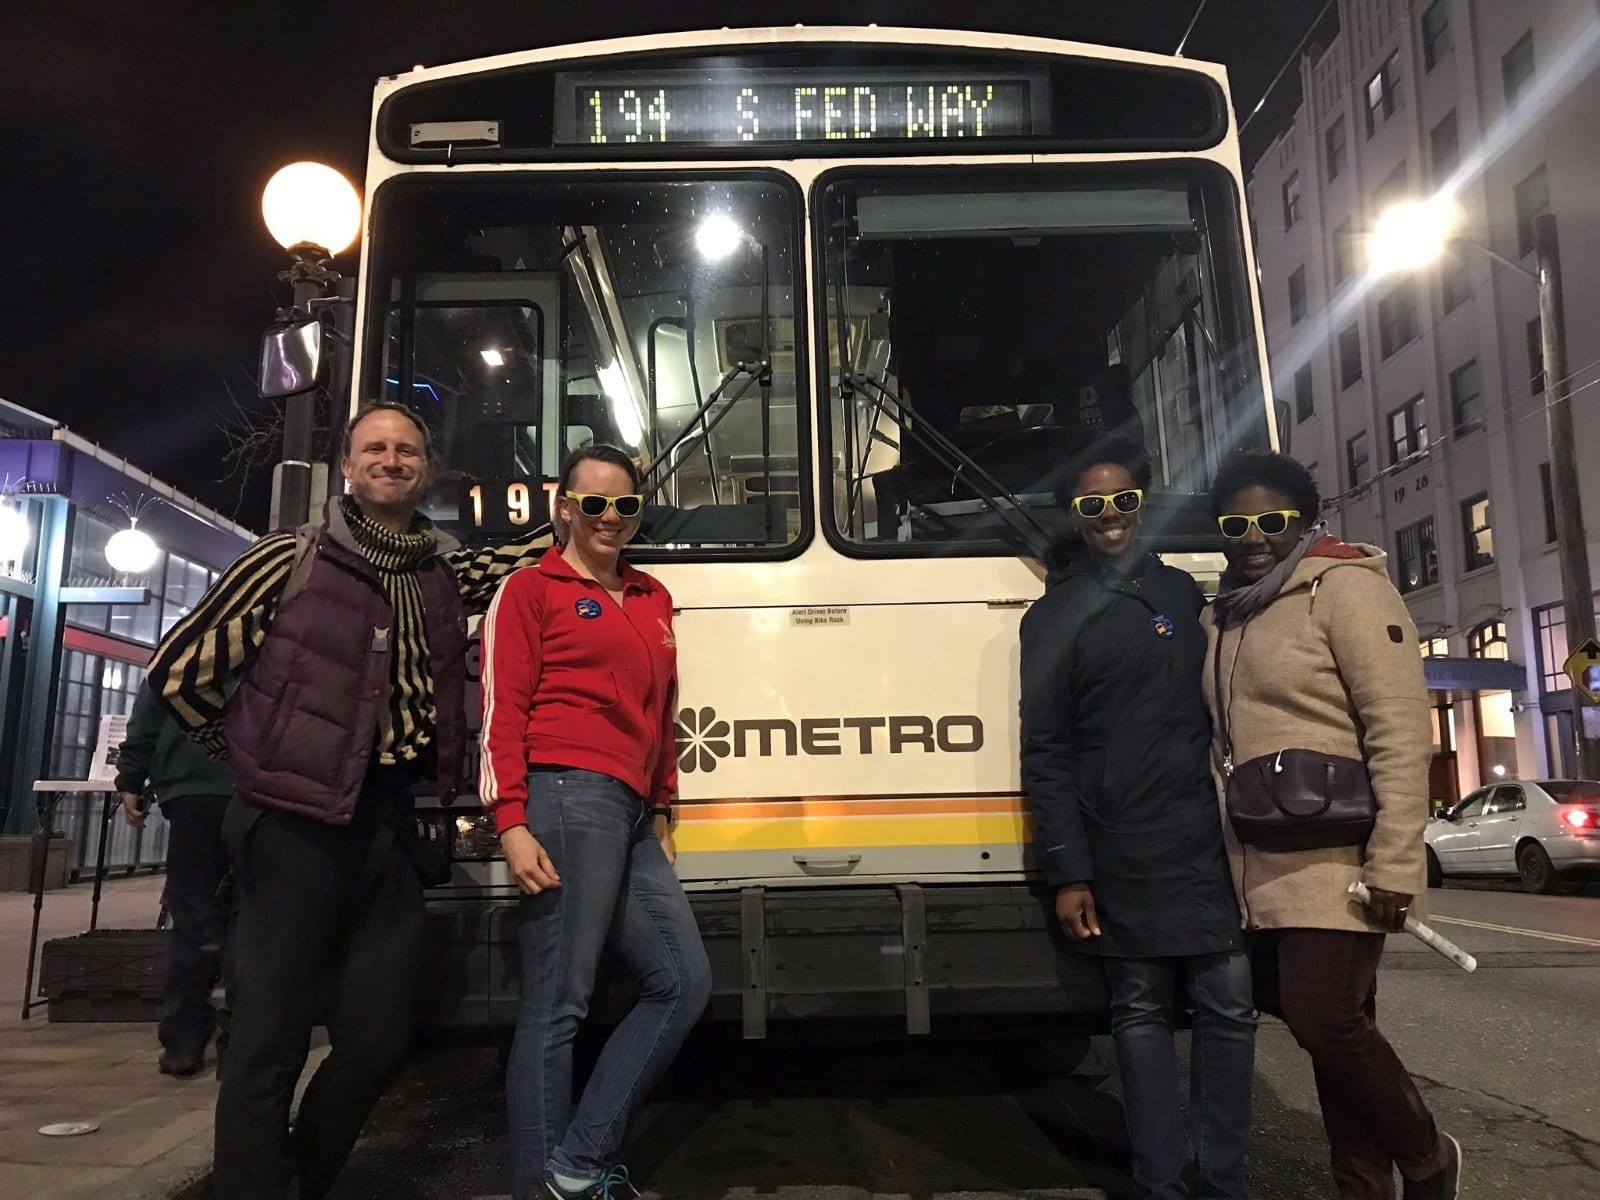 Four people standing in front of retro Metro bus